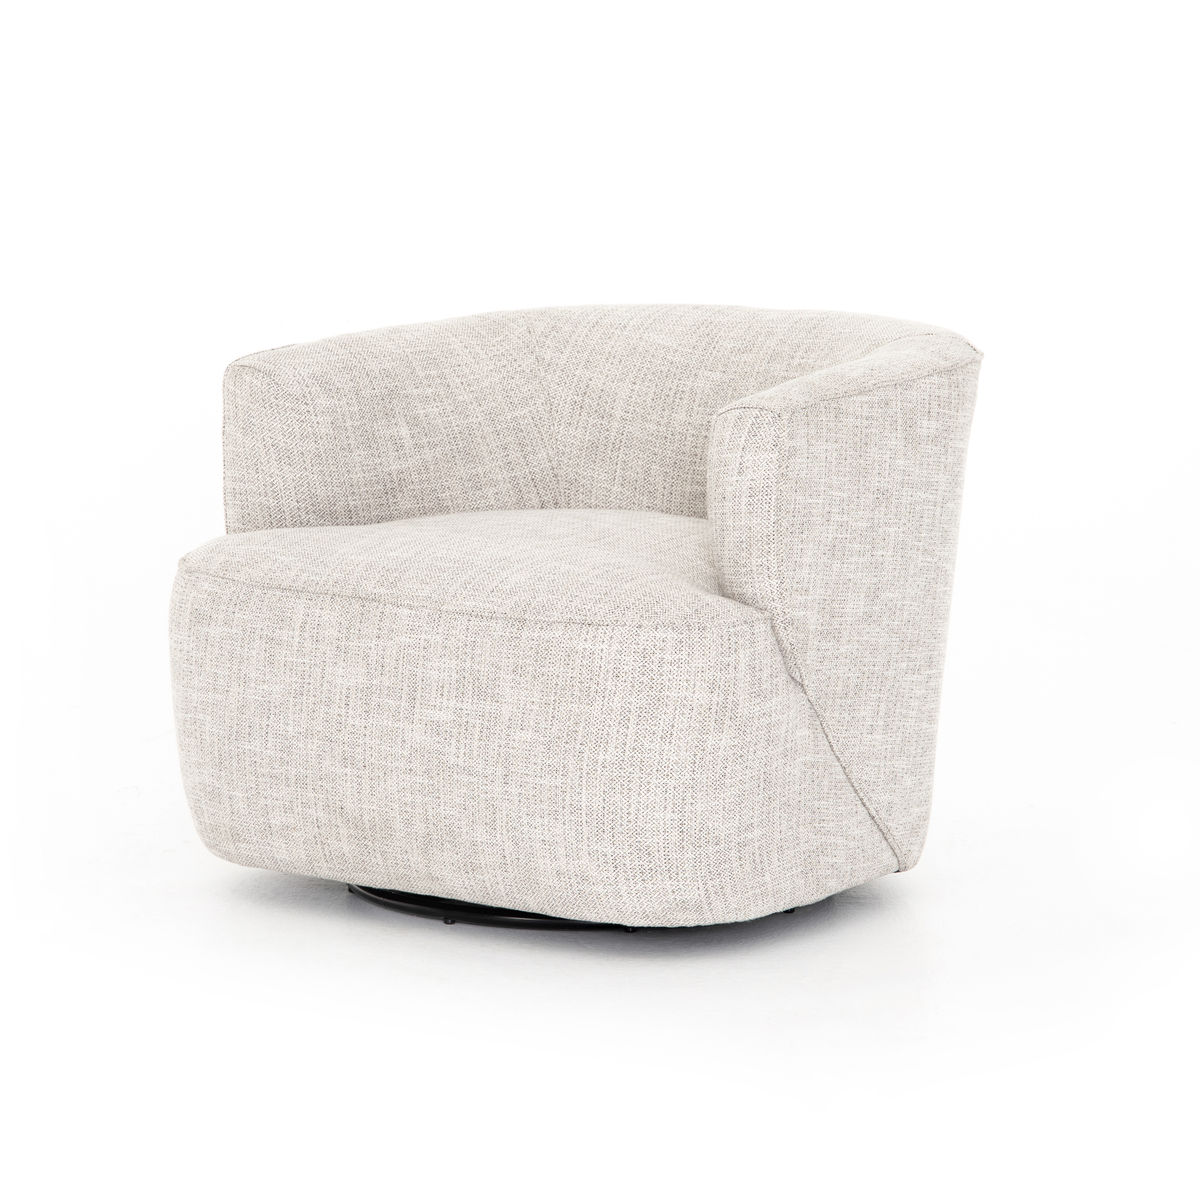 Shop Swivel Chair in Grey Textured Performance Fabric from Peggy Haddad Interiors Home on Openhaus